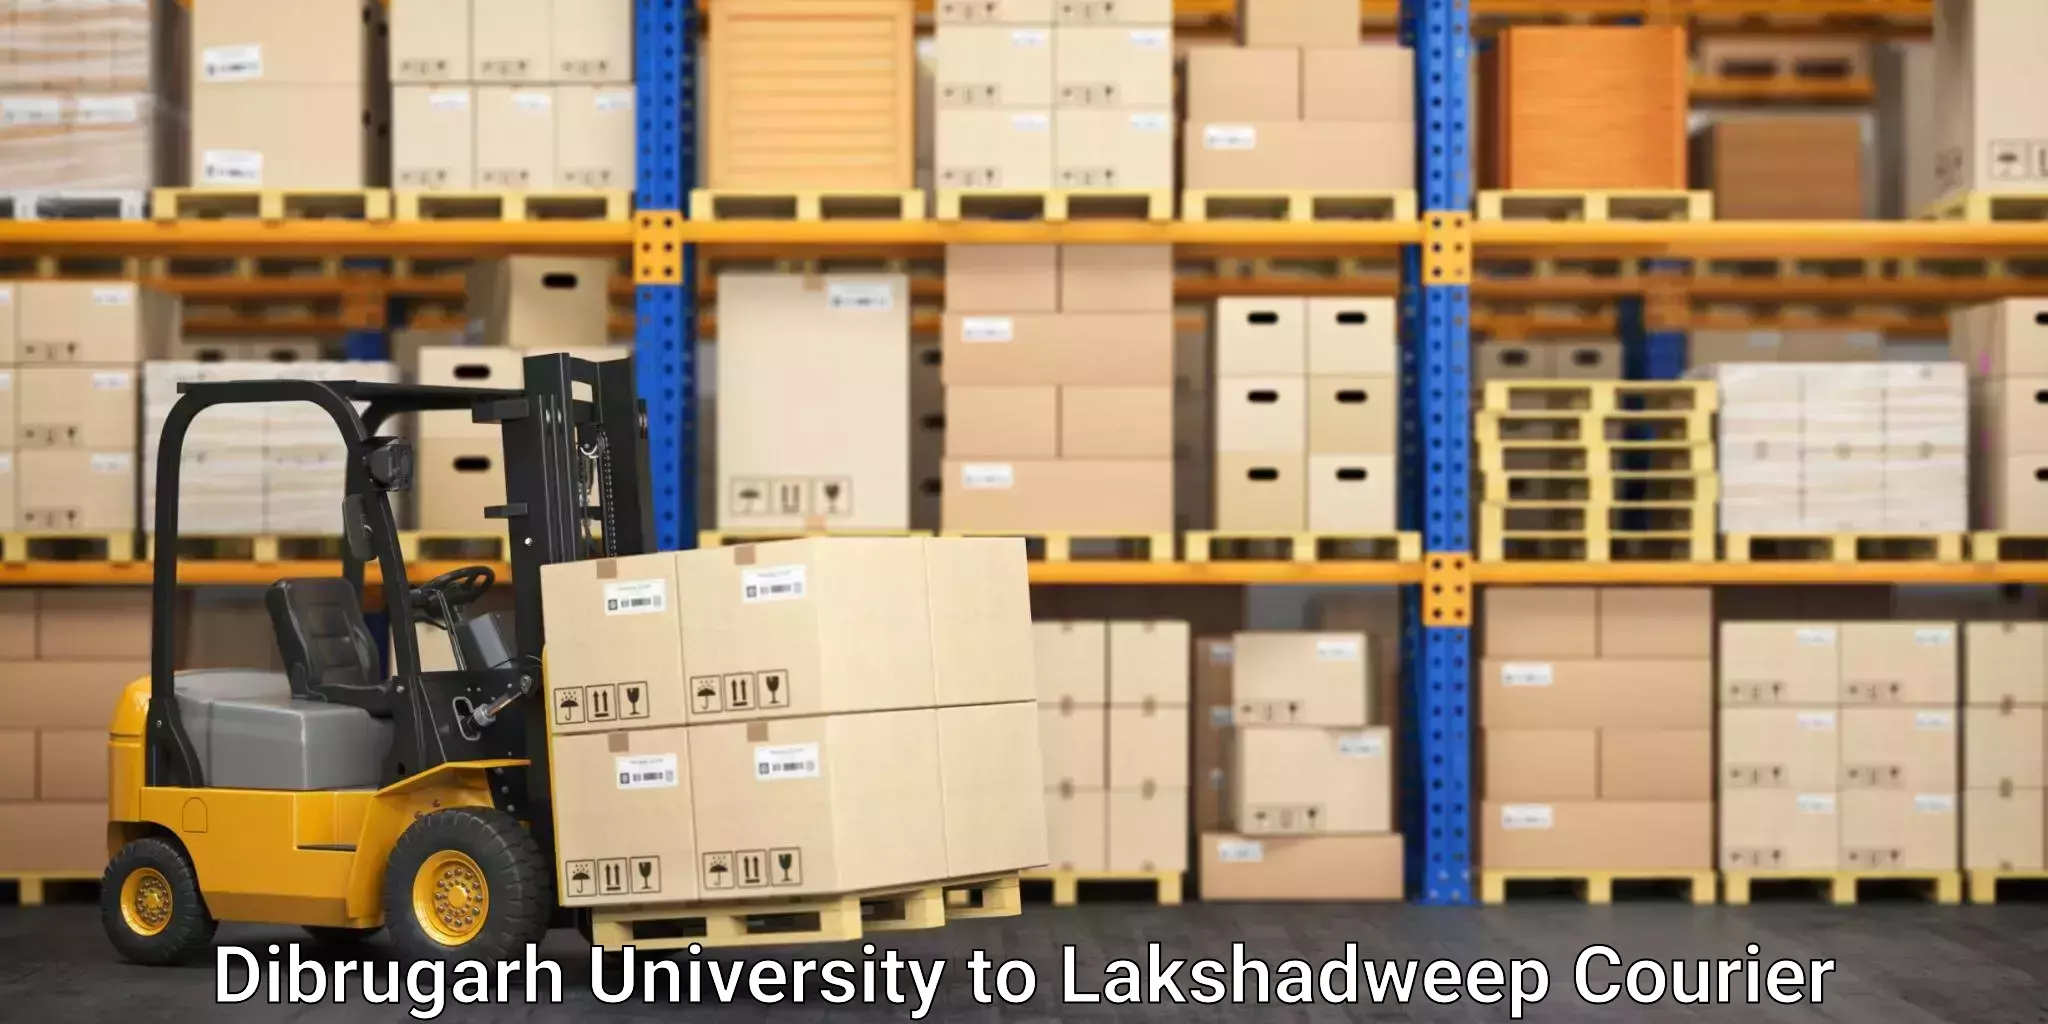 Trackable shipping service Dibrugarh University to Lakshadweep